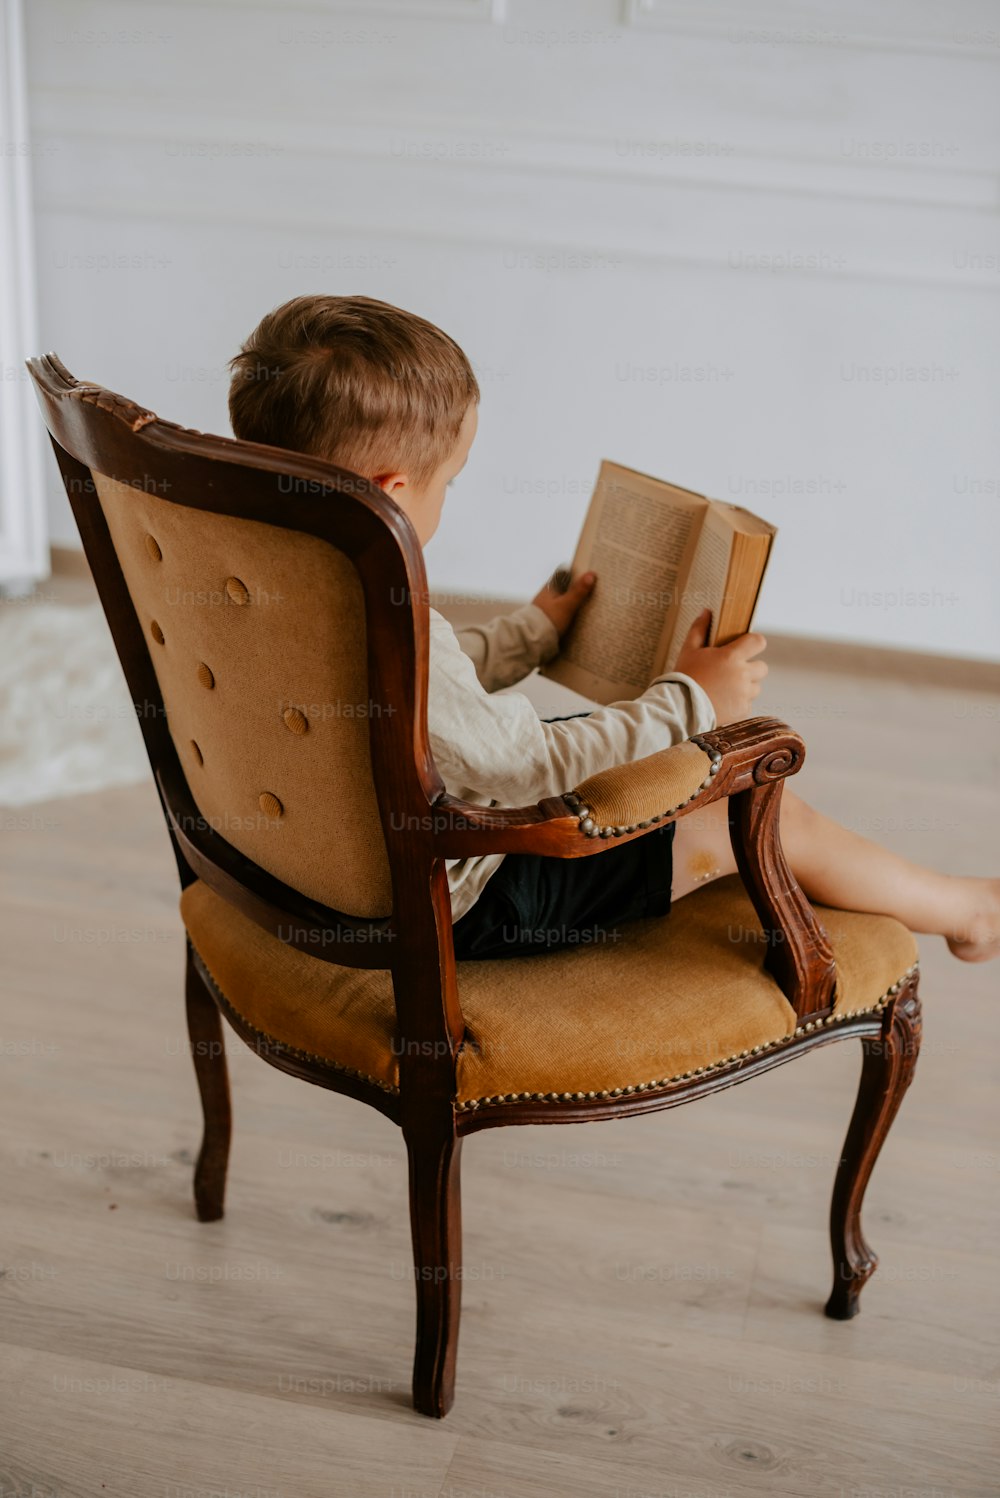 a young boy sitting in a chair reading a book